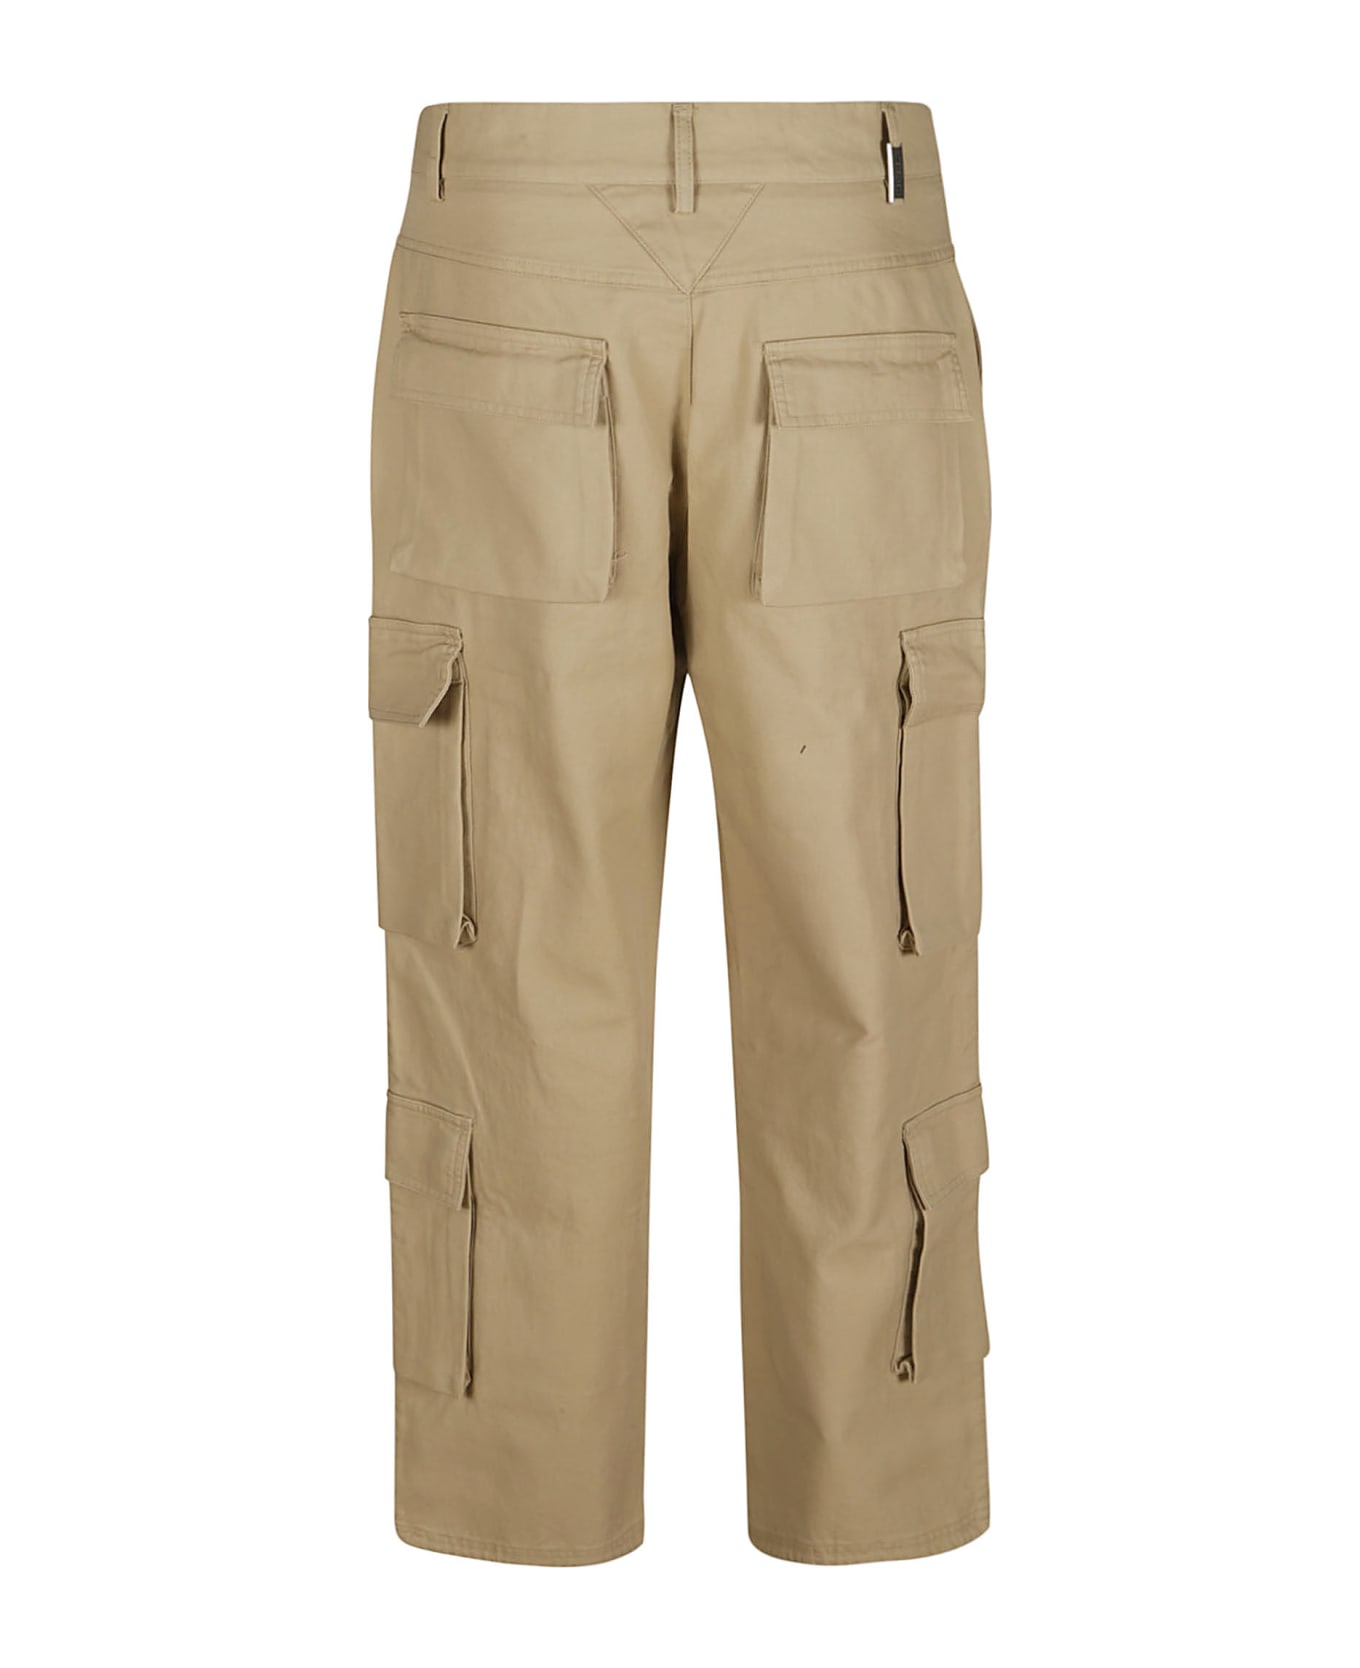 REPRESENT Baggy Cargo Trousers - Sandstone ボトムス